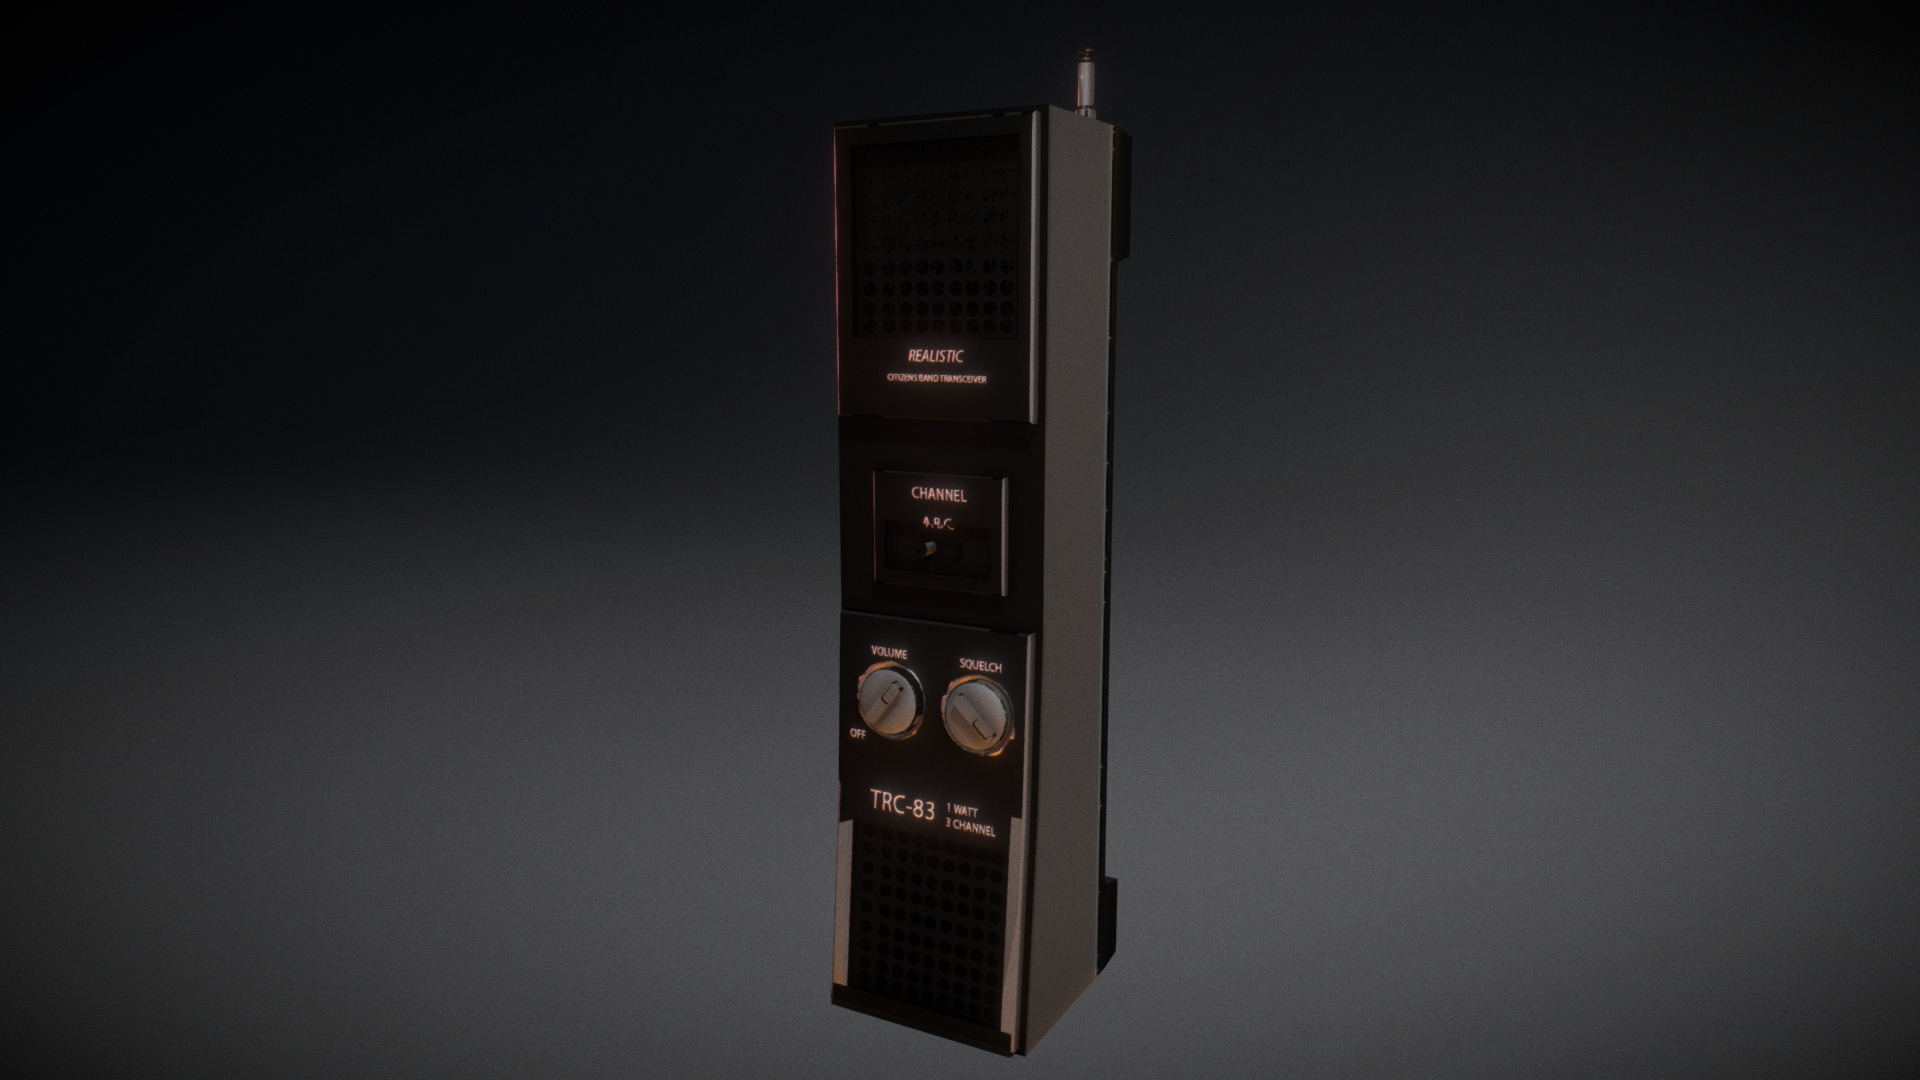 3D model Ruined Stranger things radio - This is a 3D model of the Ruined Stranger things radio. The 3D model is about a black rectangular object with buttons and a screen.